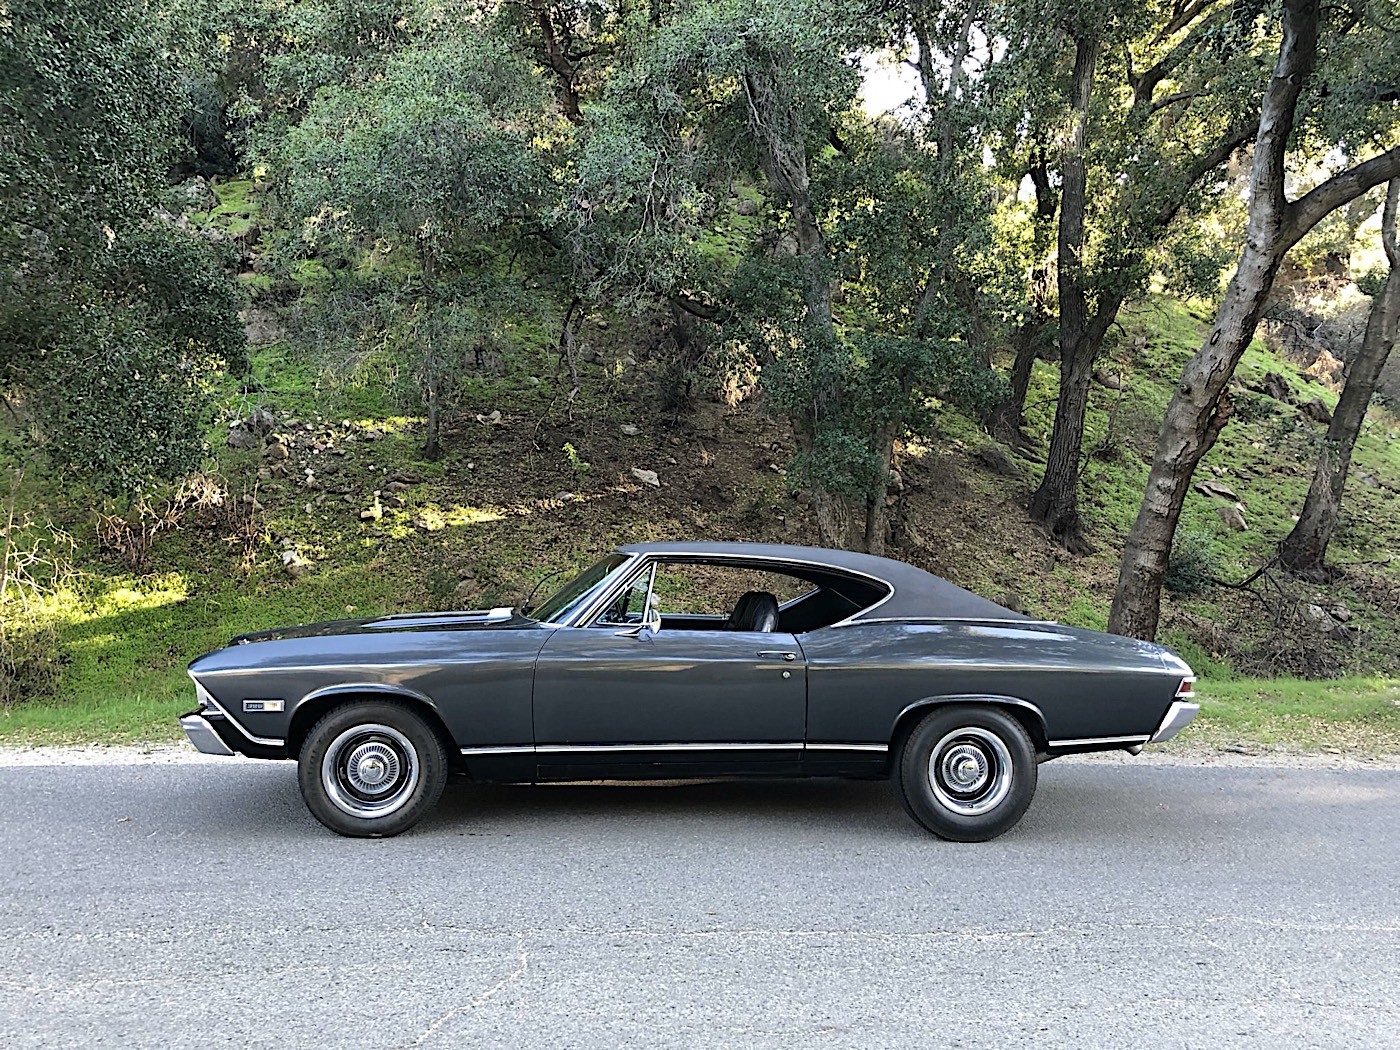 1968 Chevy Chevelle SS Is Why We Love the Sixties - autoevolution